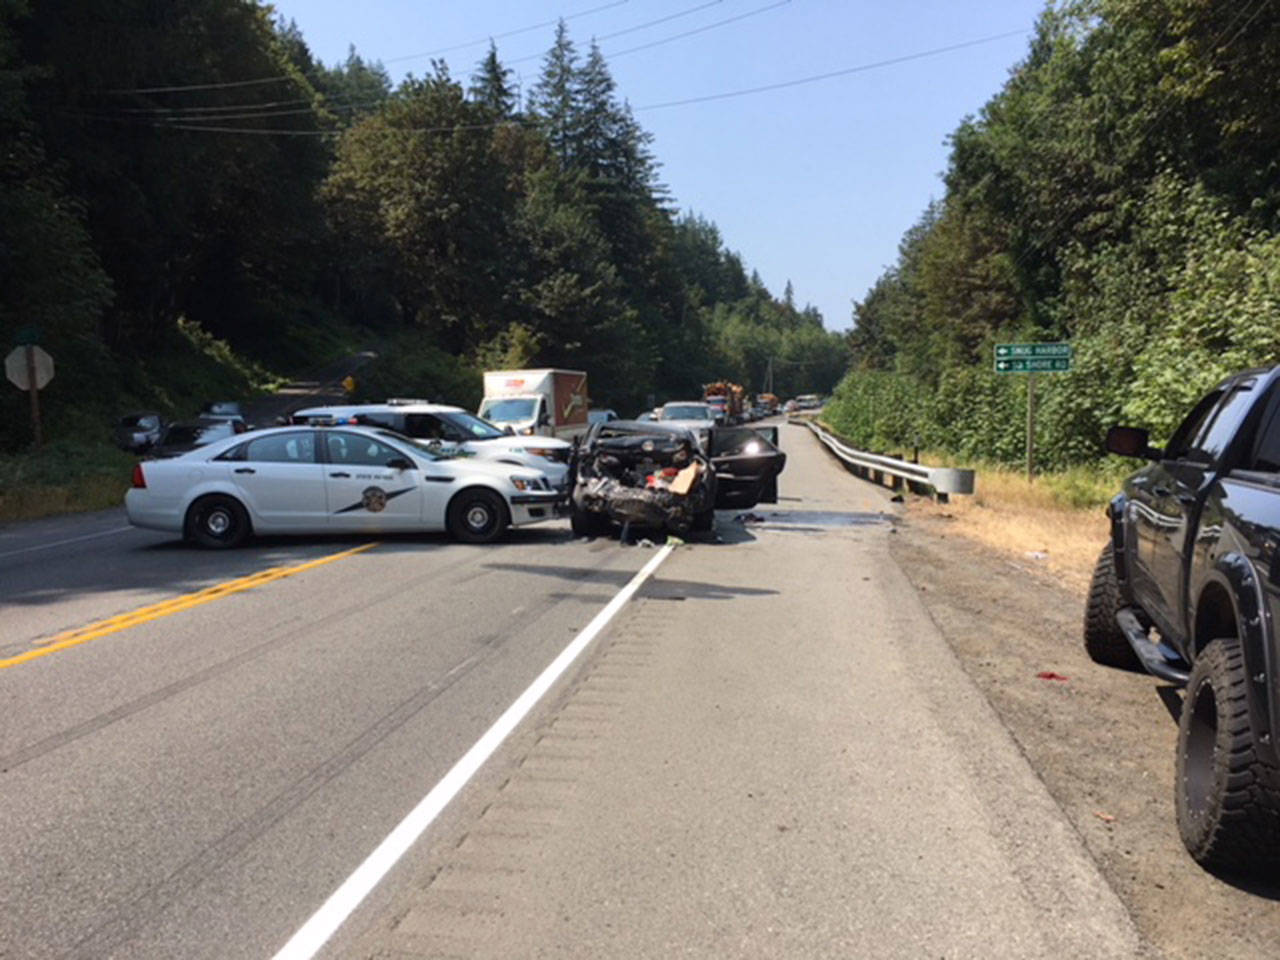 A four-vehicle chain reaction of collisions near South Shore Road block traffic in both directions on U.S. Highway 101 on Monday. (Clallam County Fire District No. 2)